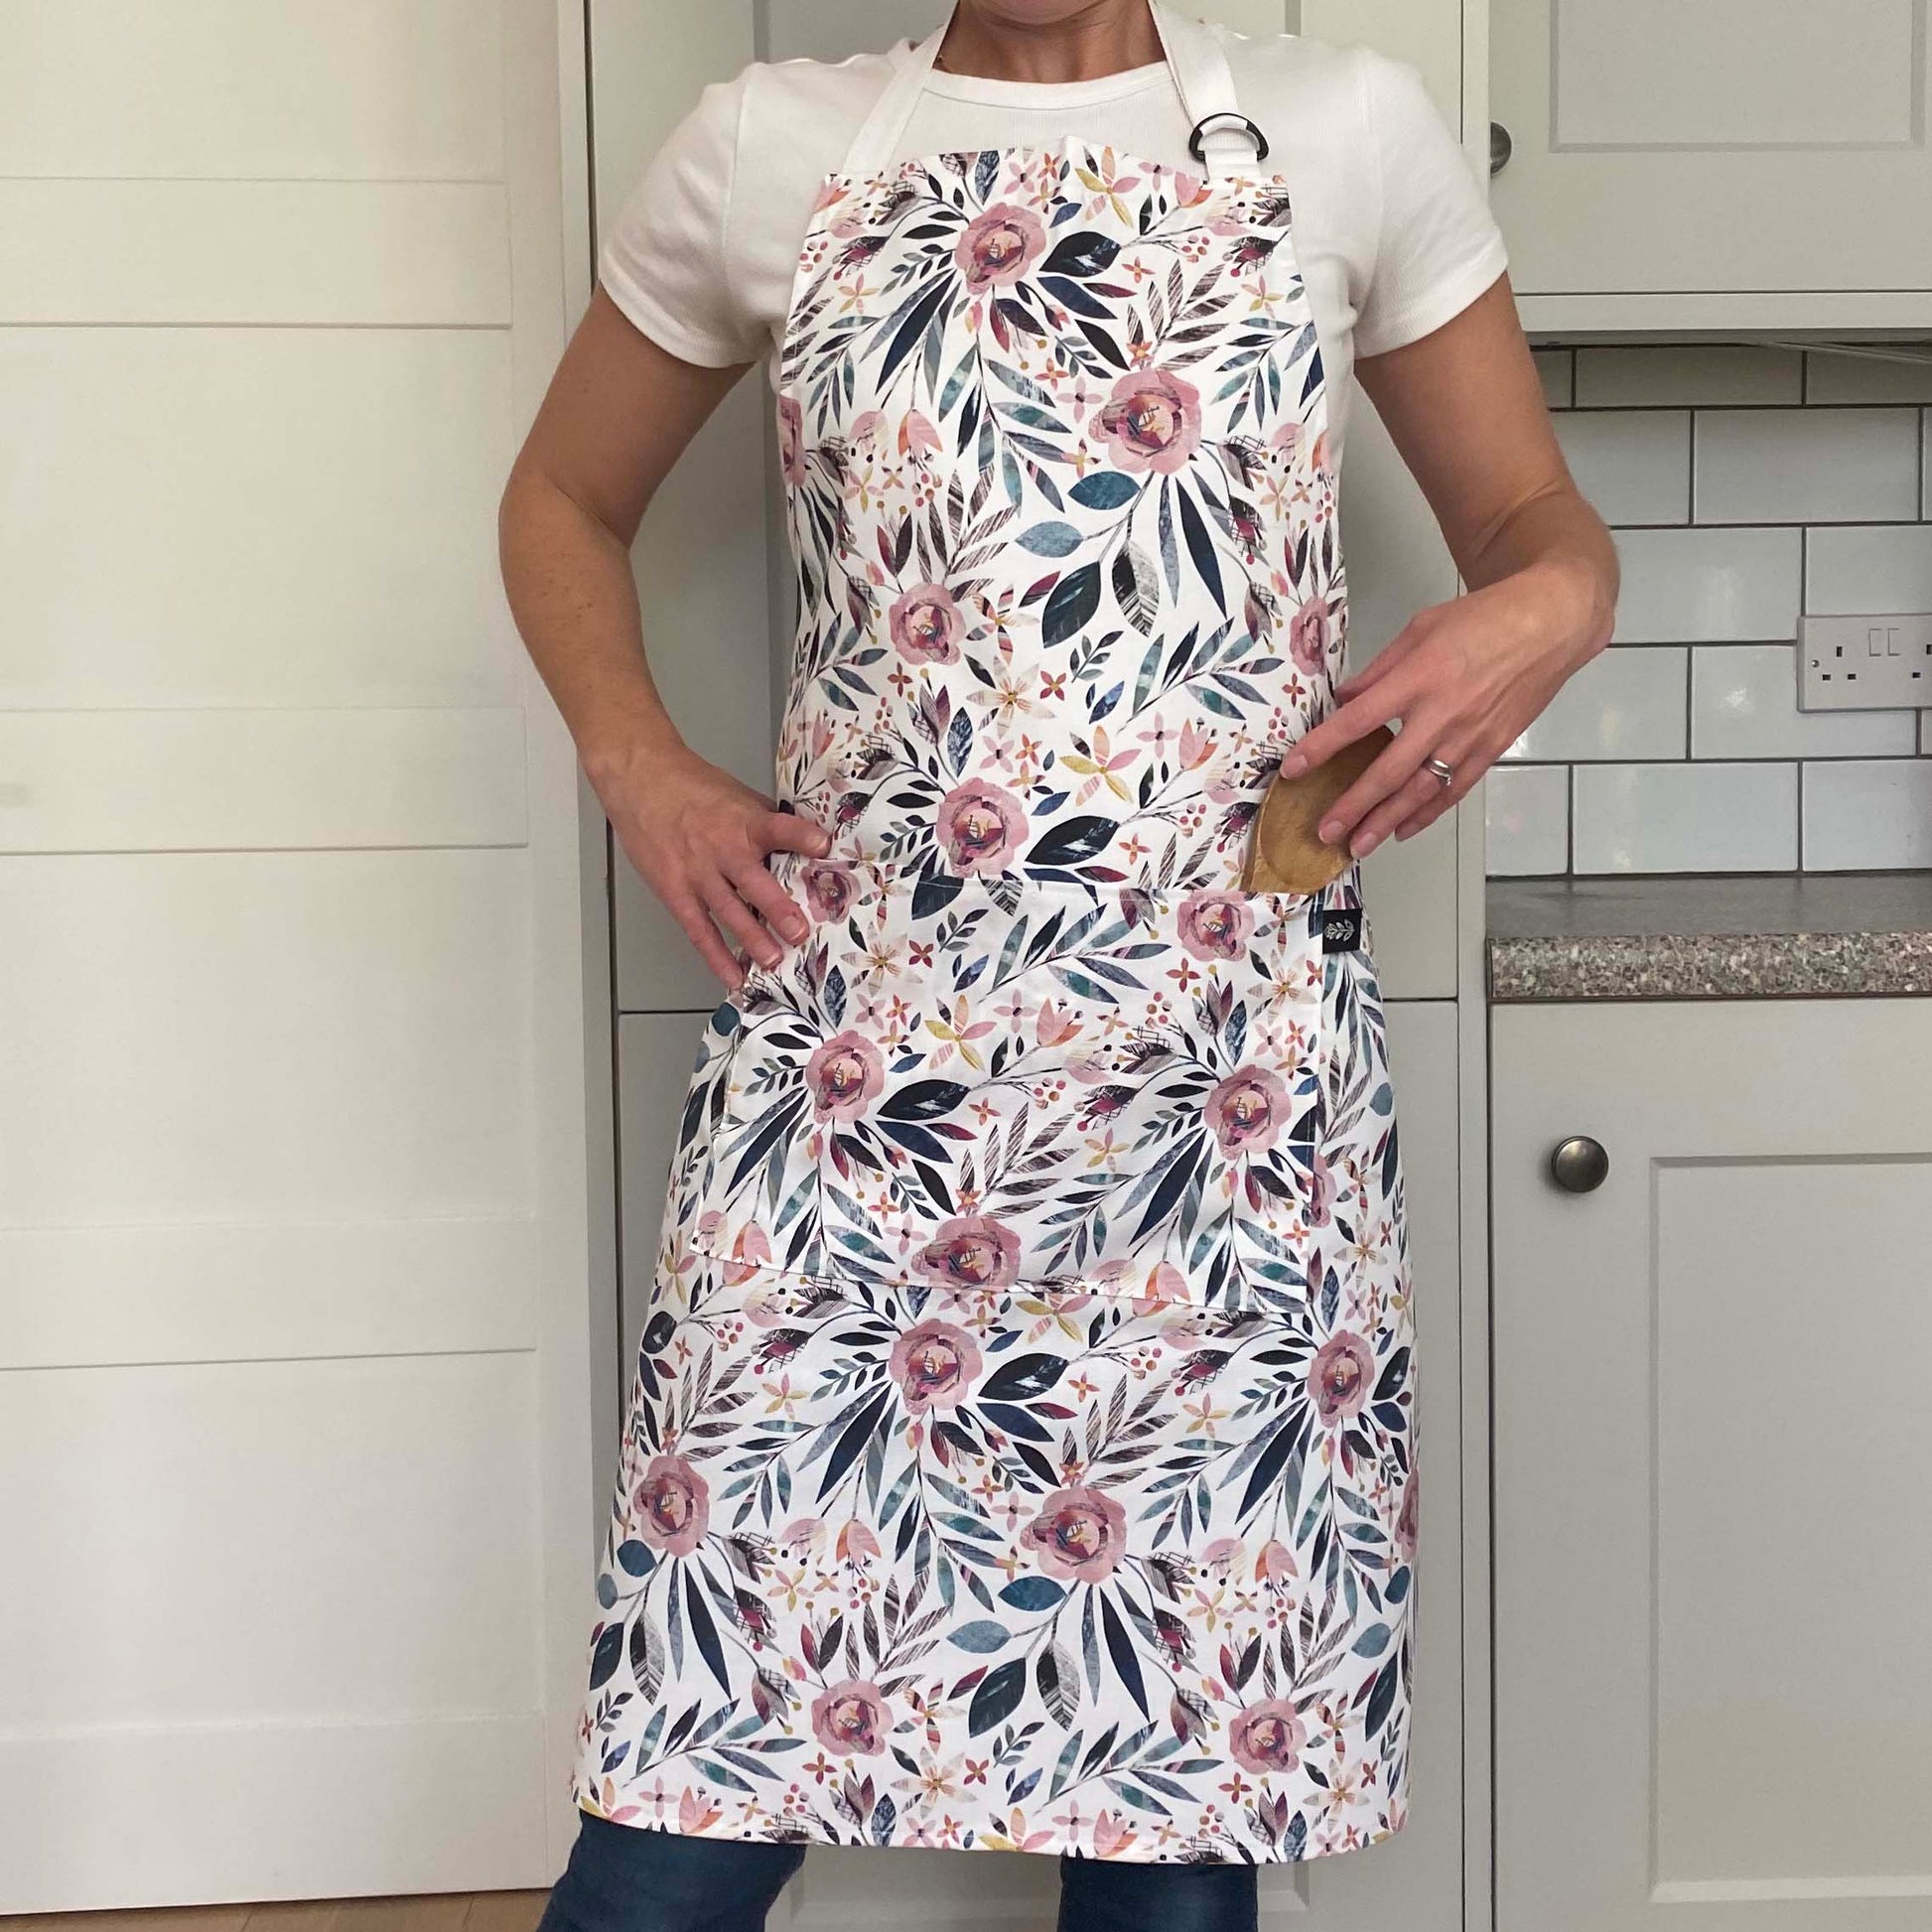 The model wears a Summer Floral Apron featuring pink roses with green foliage.  The apron has two front pockets and an adjustable white neck strap.